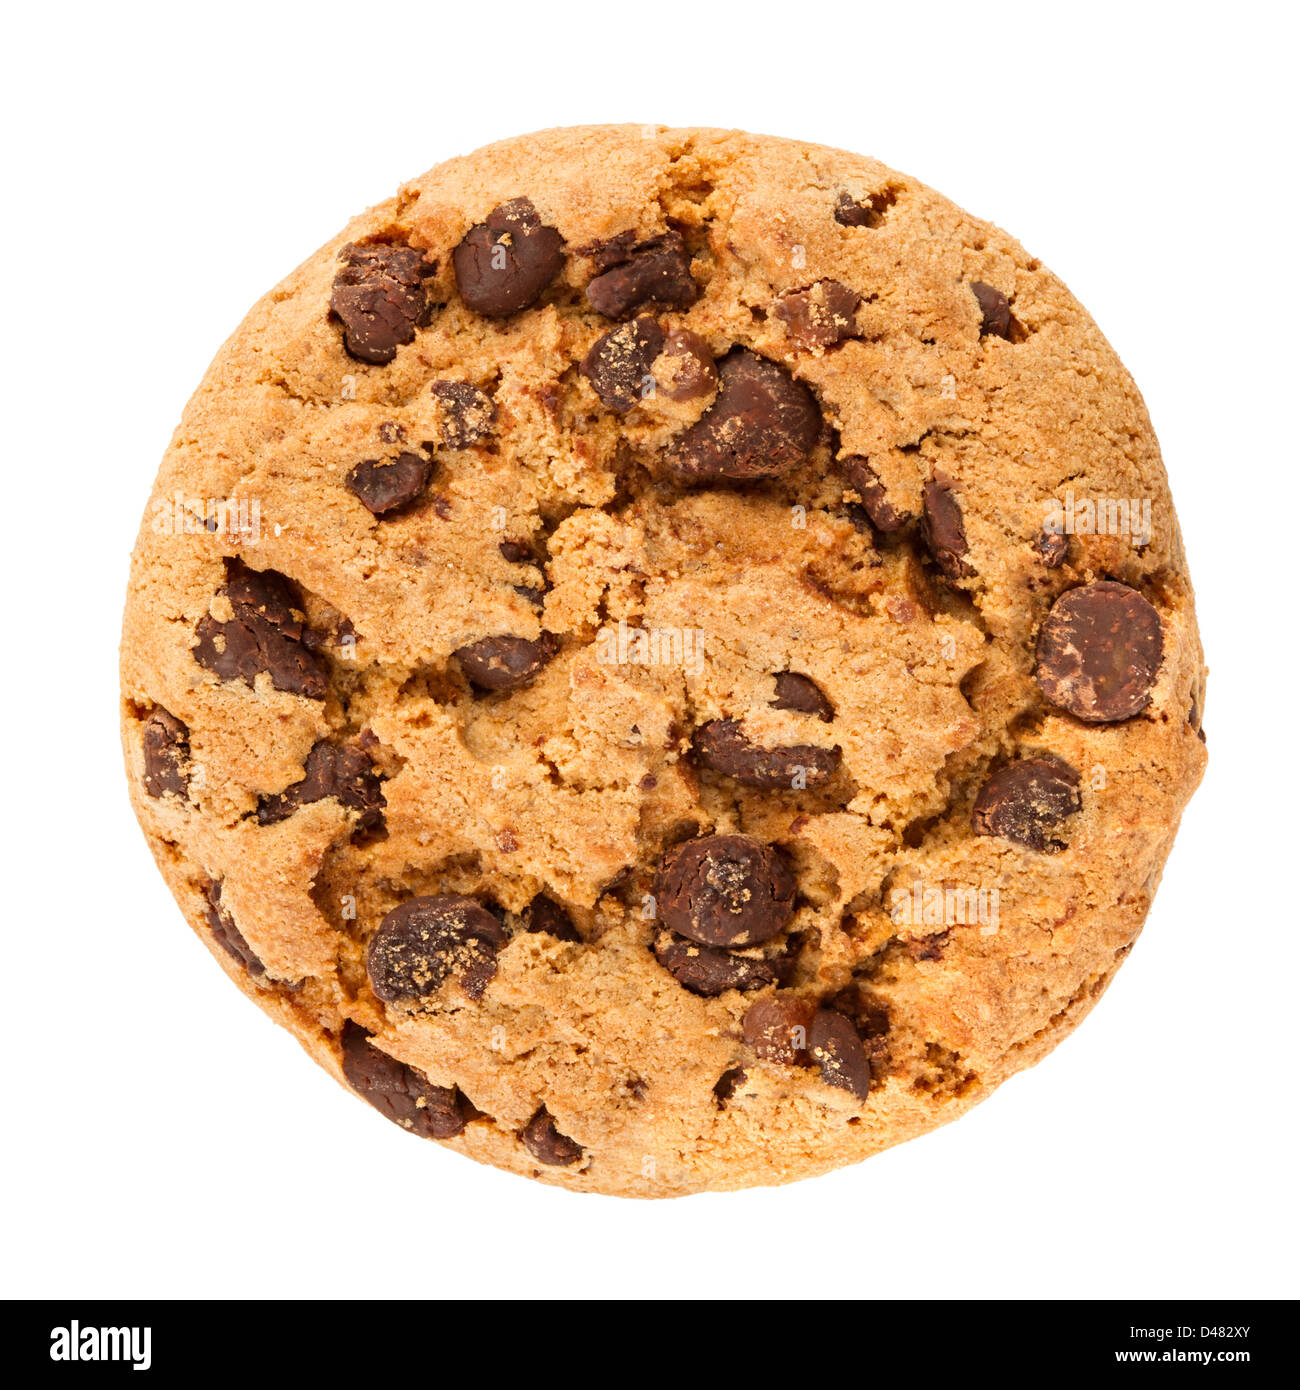 Chocolate cookie in front of white background Banque D'Images